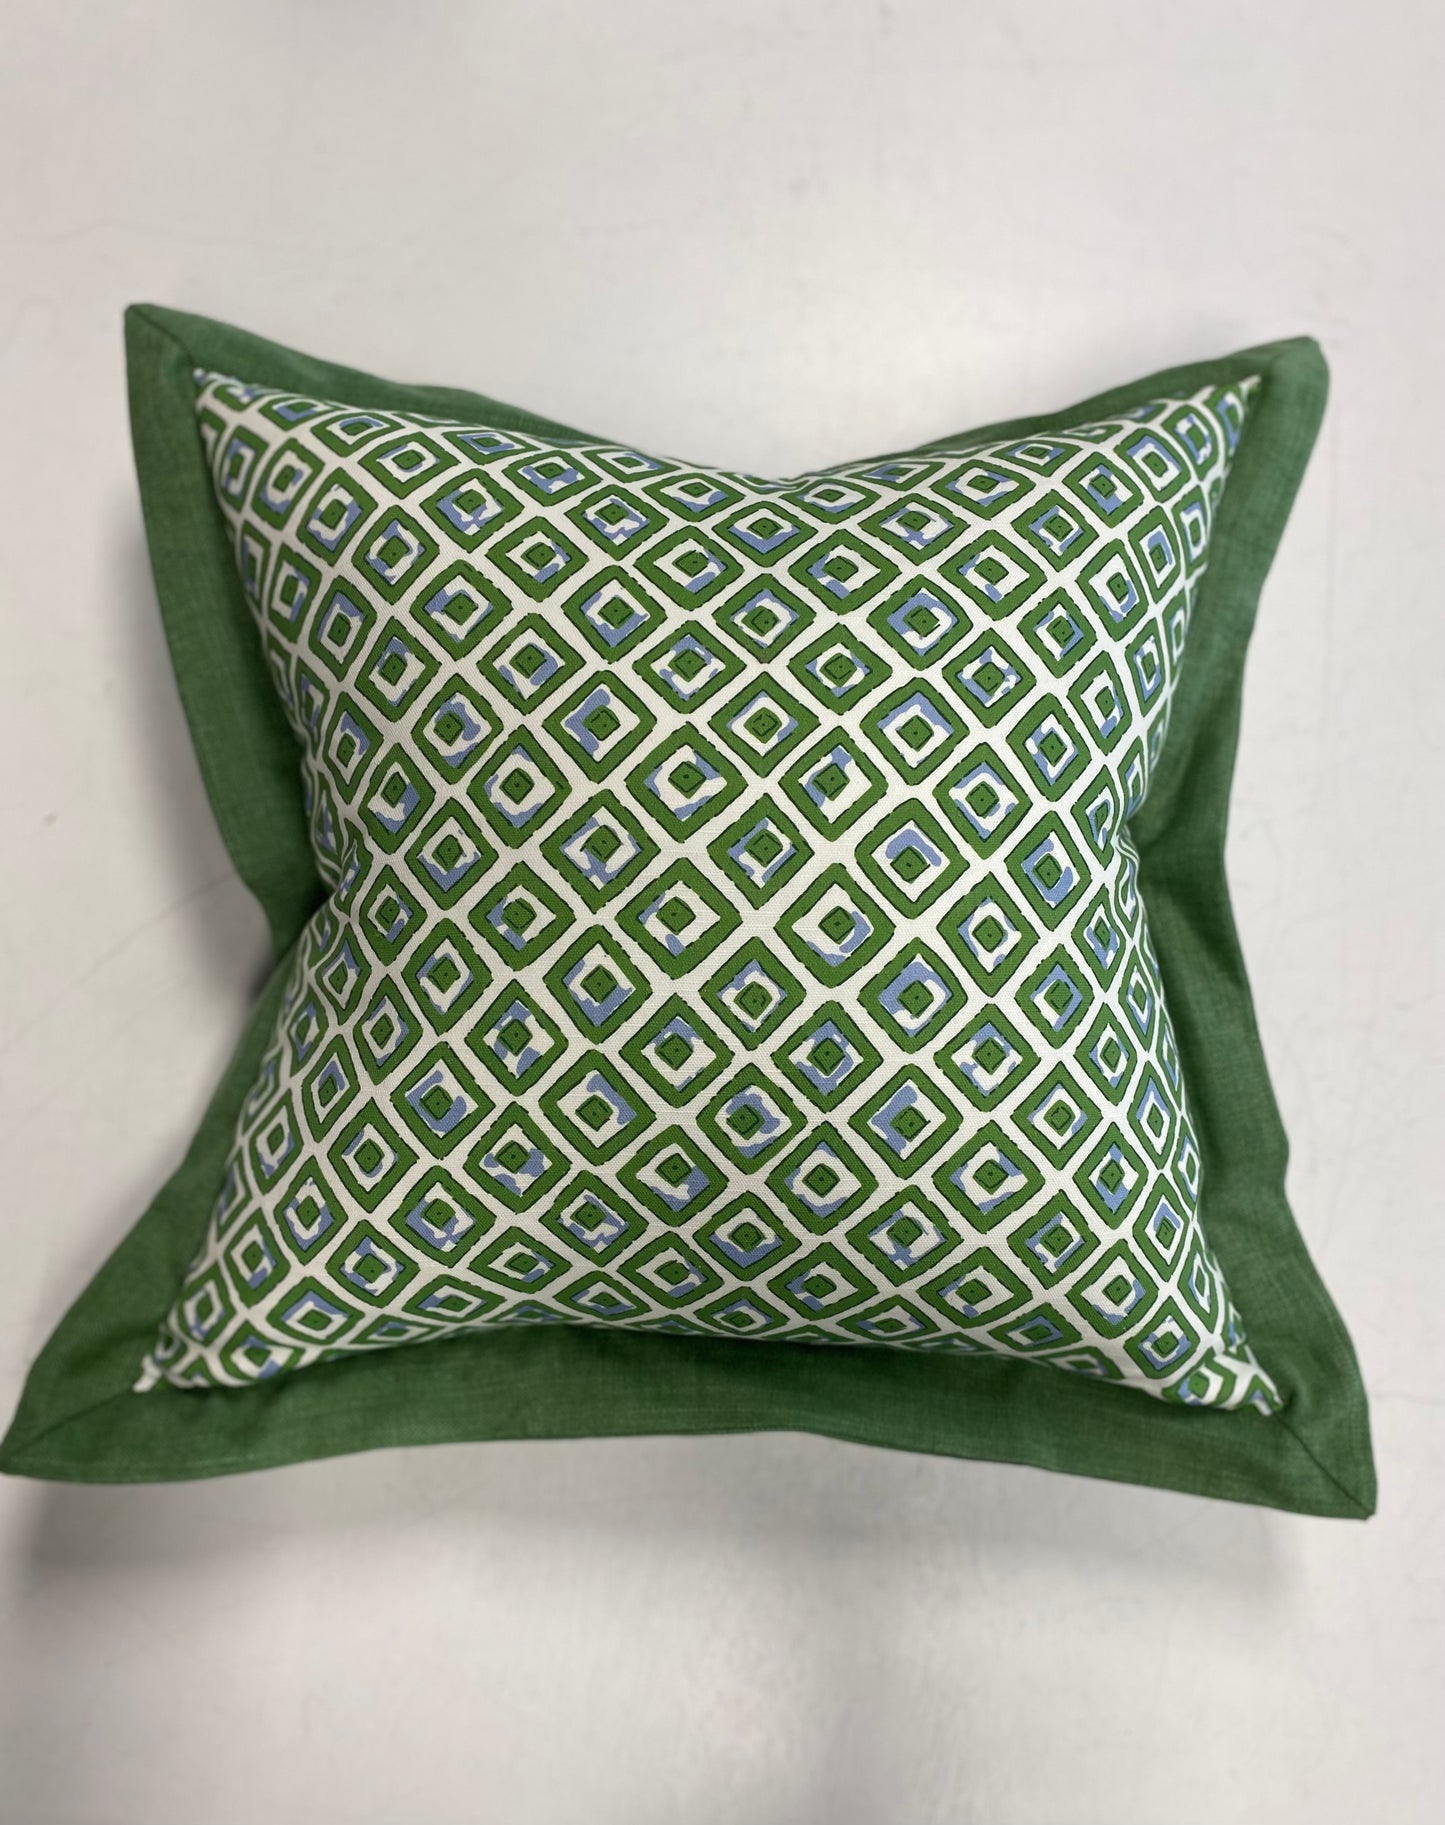 Thibaut Indian Diamond Pillows in Green with 2" mitered contrast flap (comes in other colors)